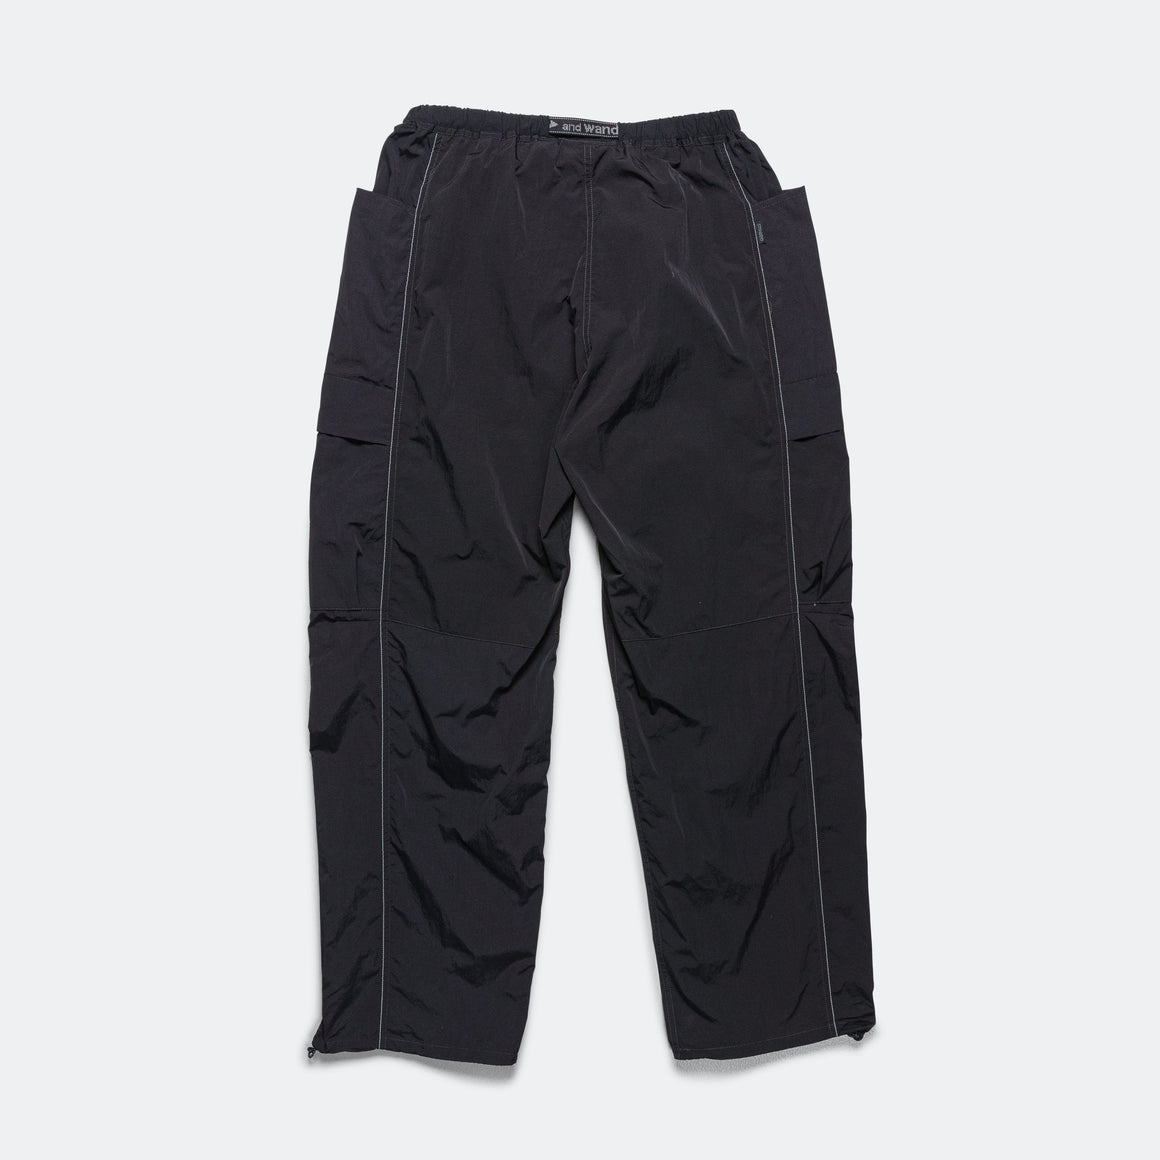 Gramicci - Patchwork Wind Pant × and wander - Black - UP THERE